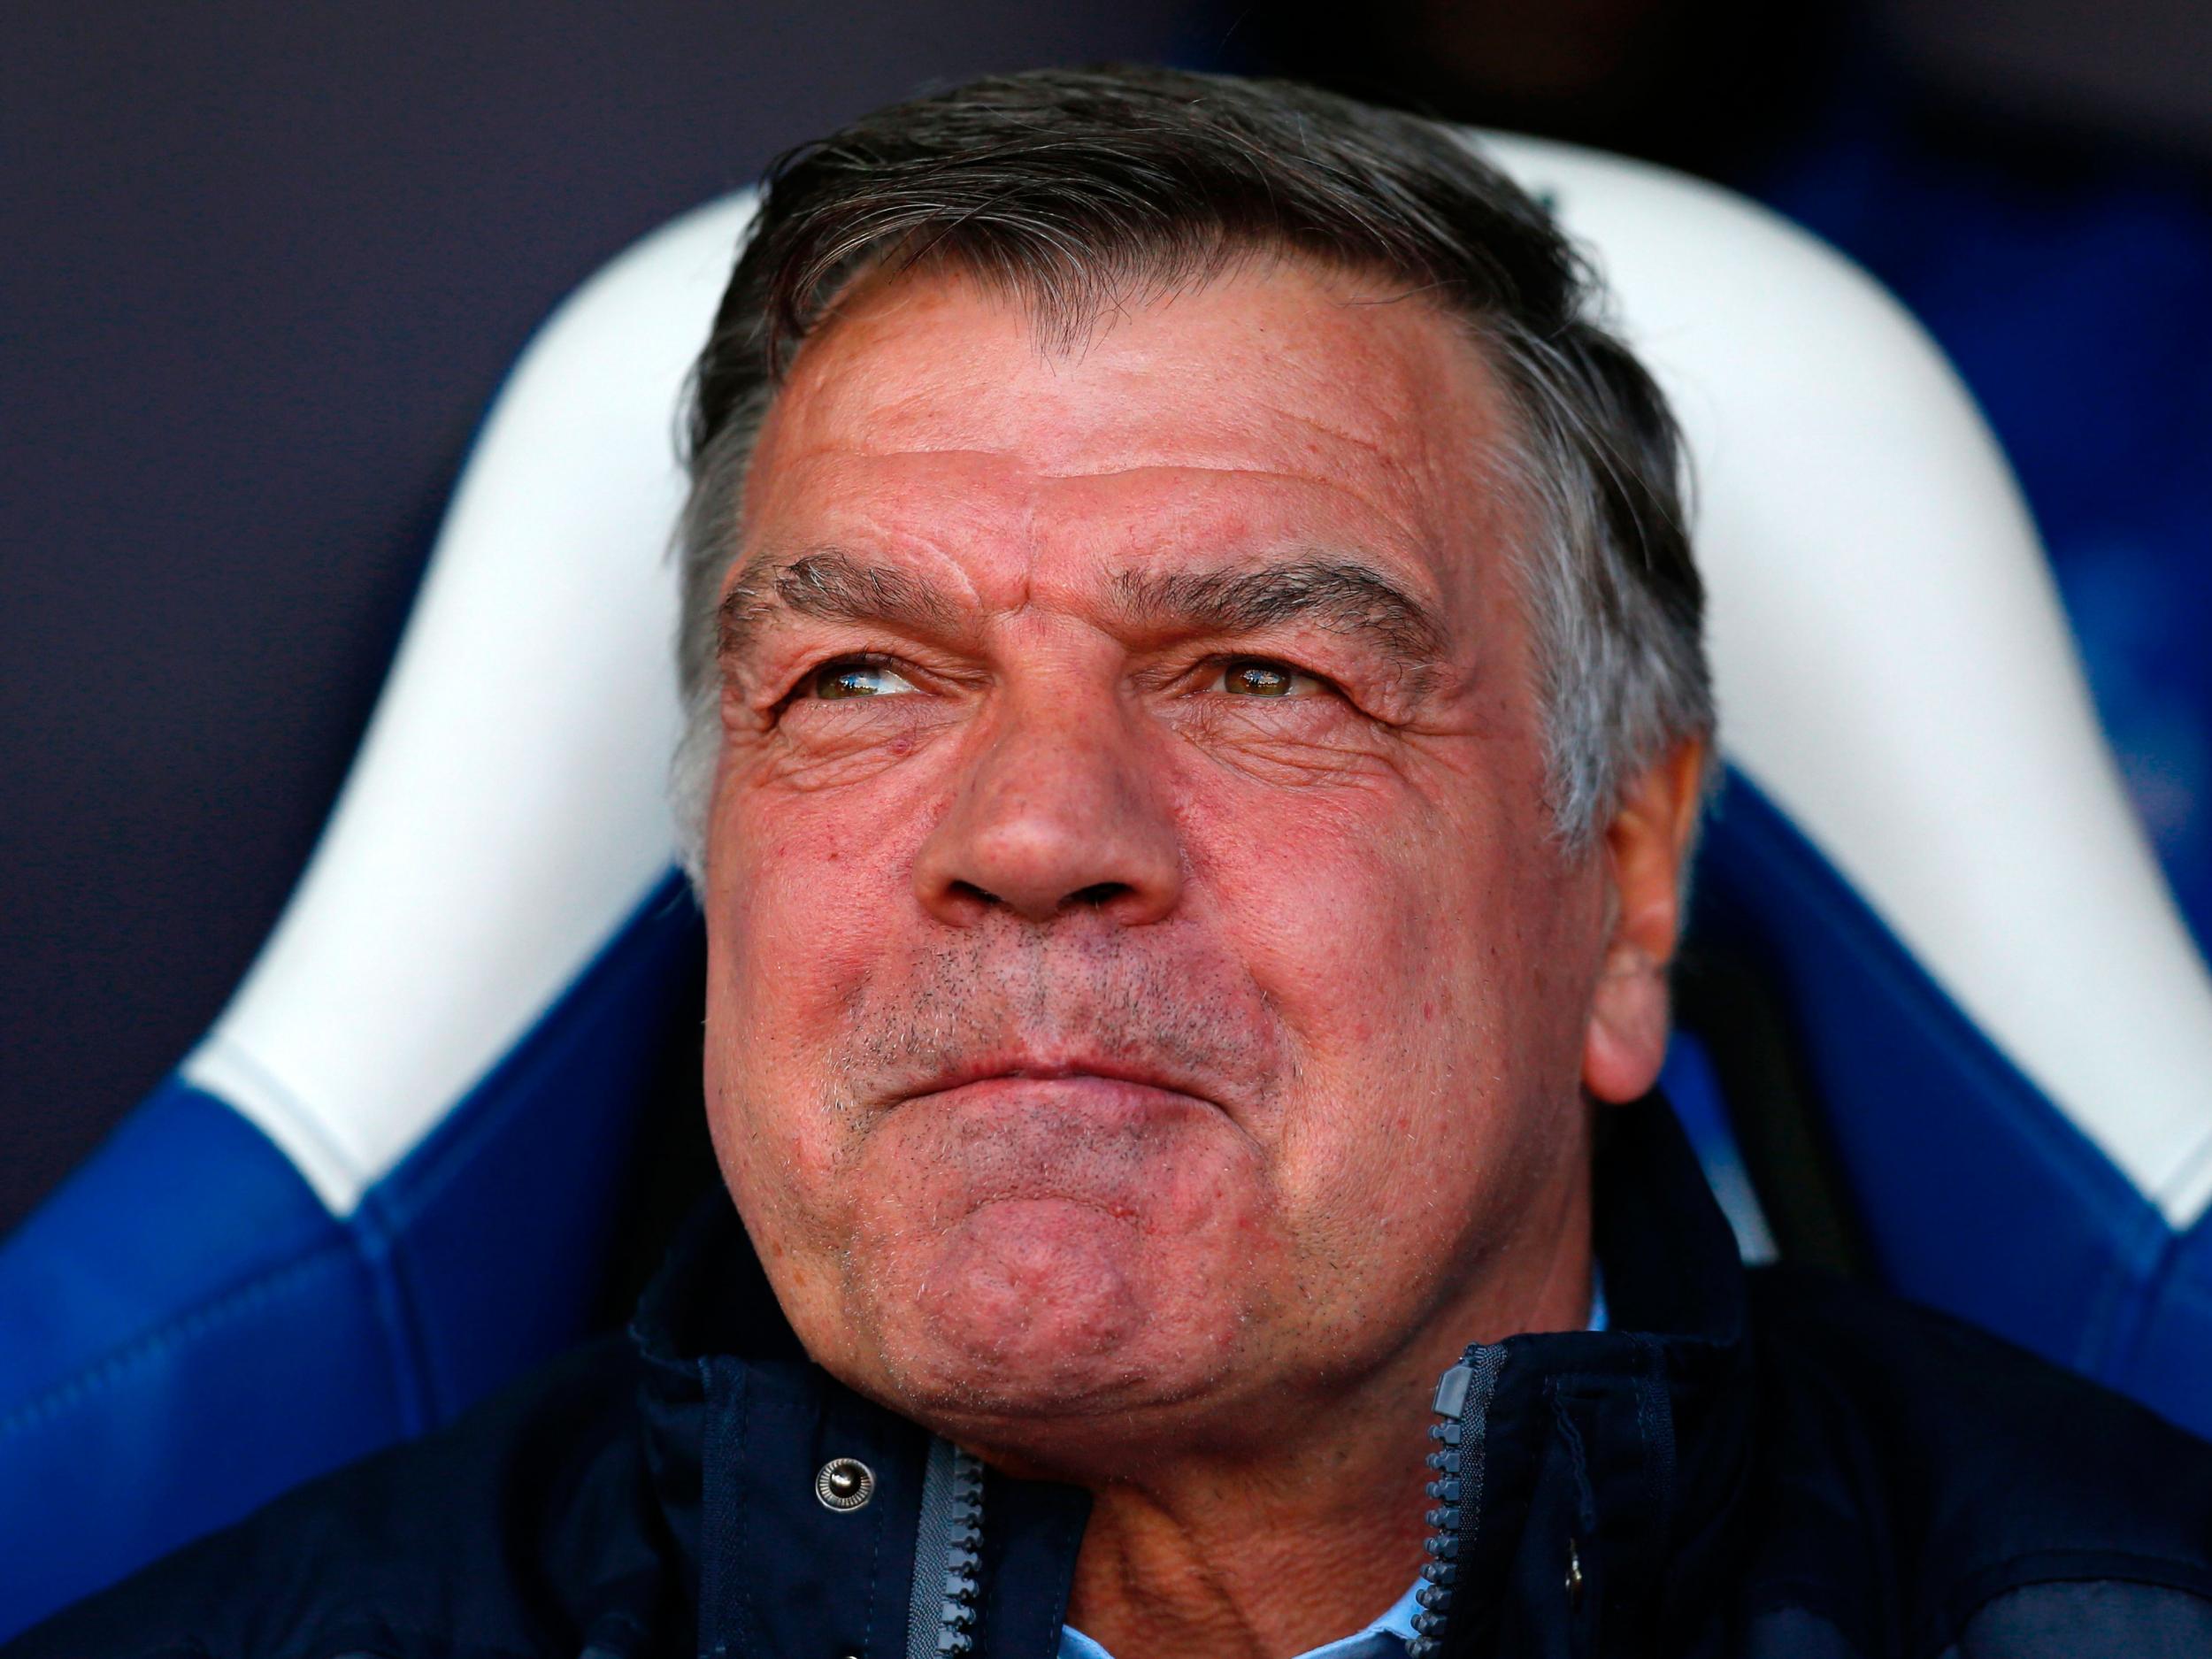 Sam Allardyce has been out of football since leaving Crystal Palace in the summer